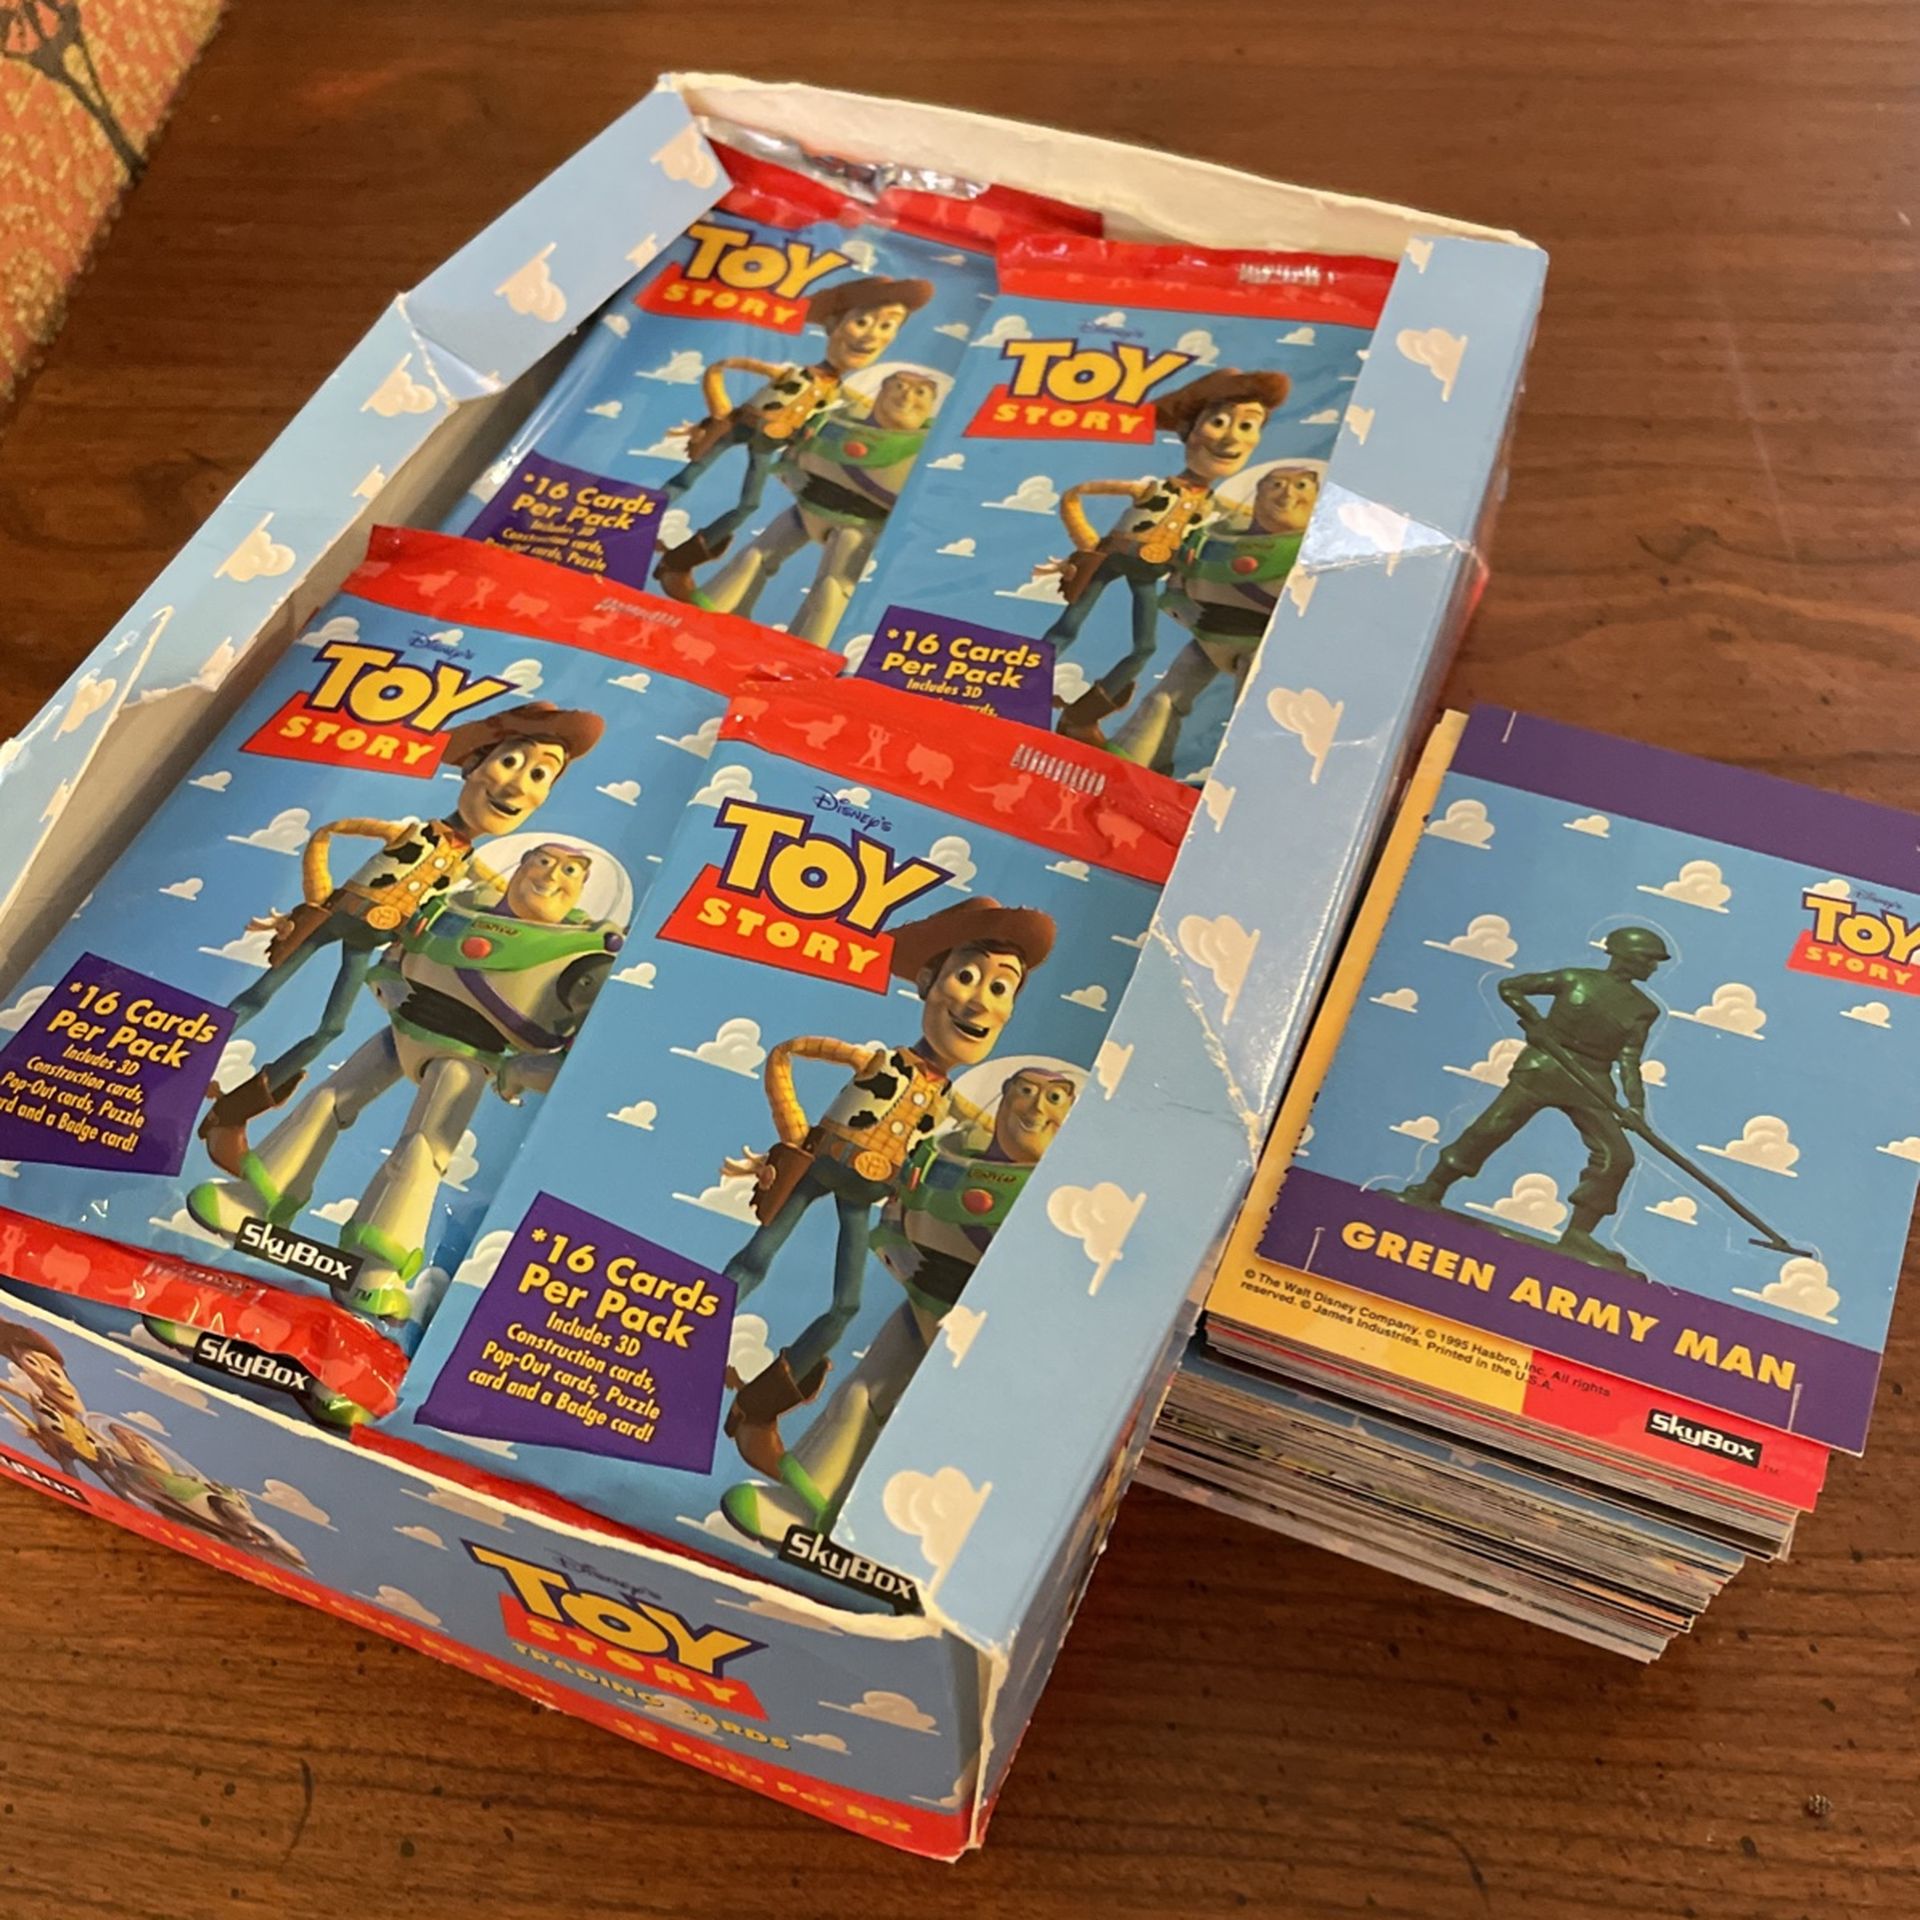 LOT of 1995 Toy Story Trading Cards